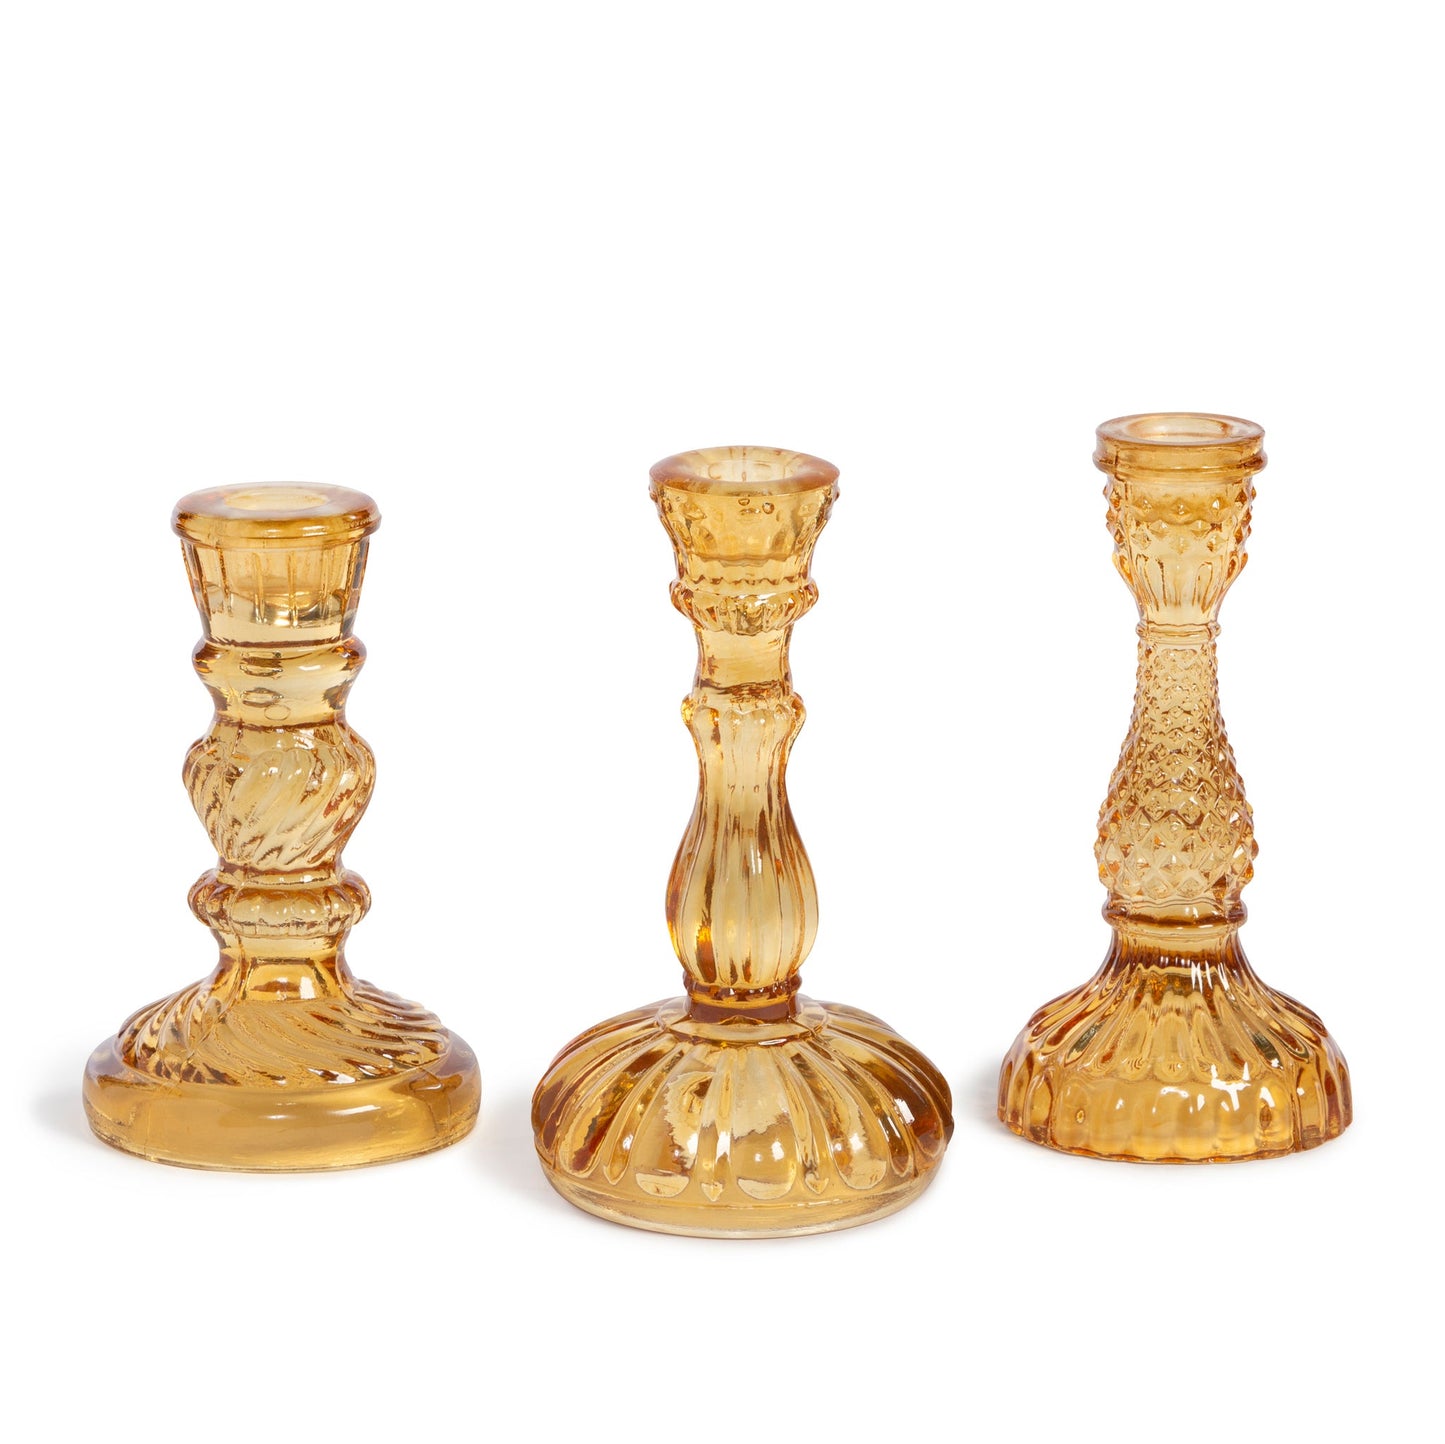 Maybelle Amber Glass Taper Holders, Set of 3